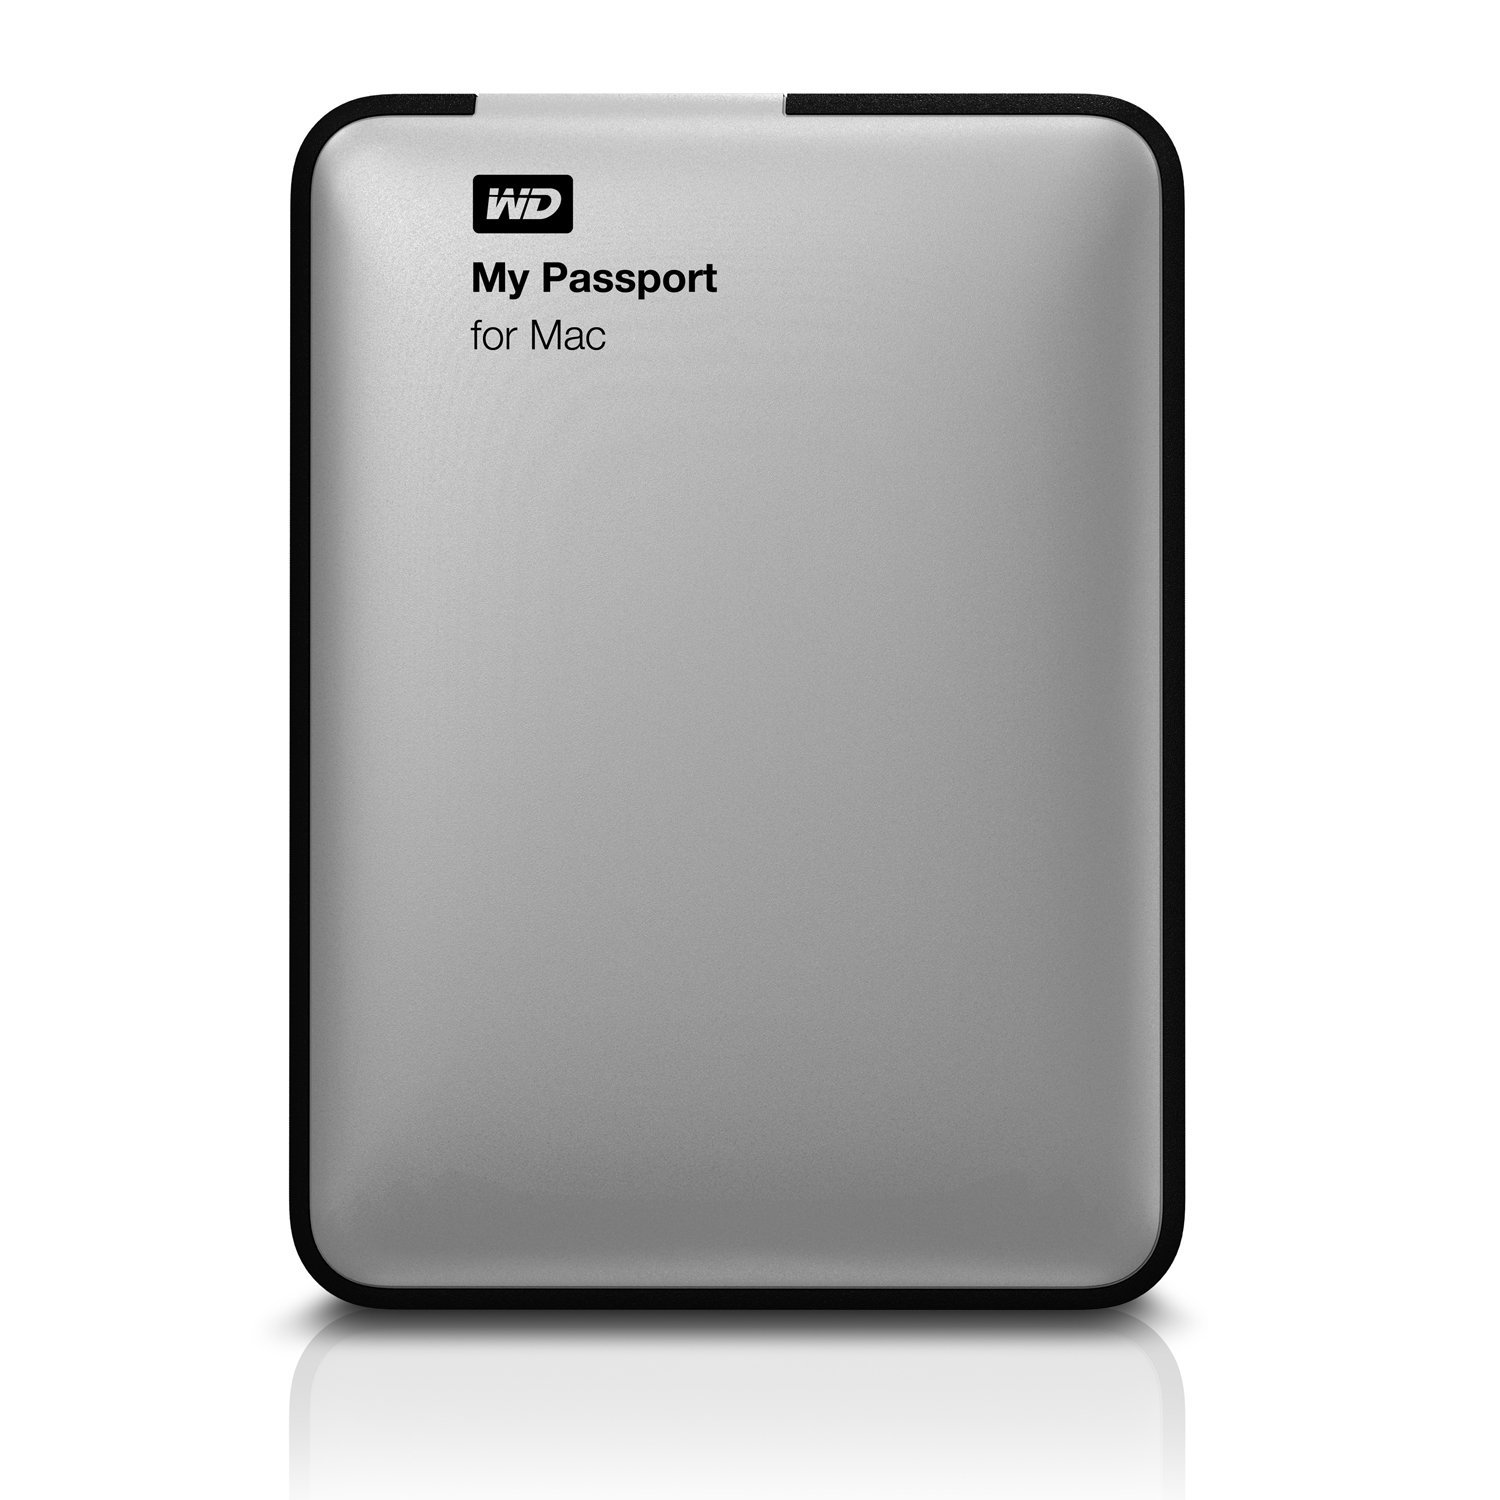 wd passport for mac not showing up